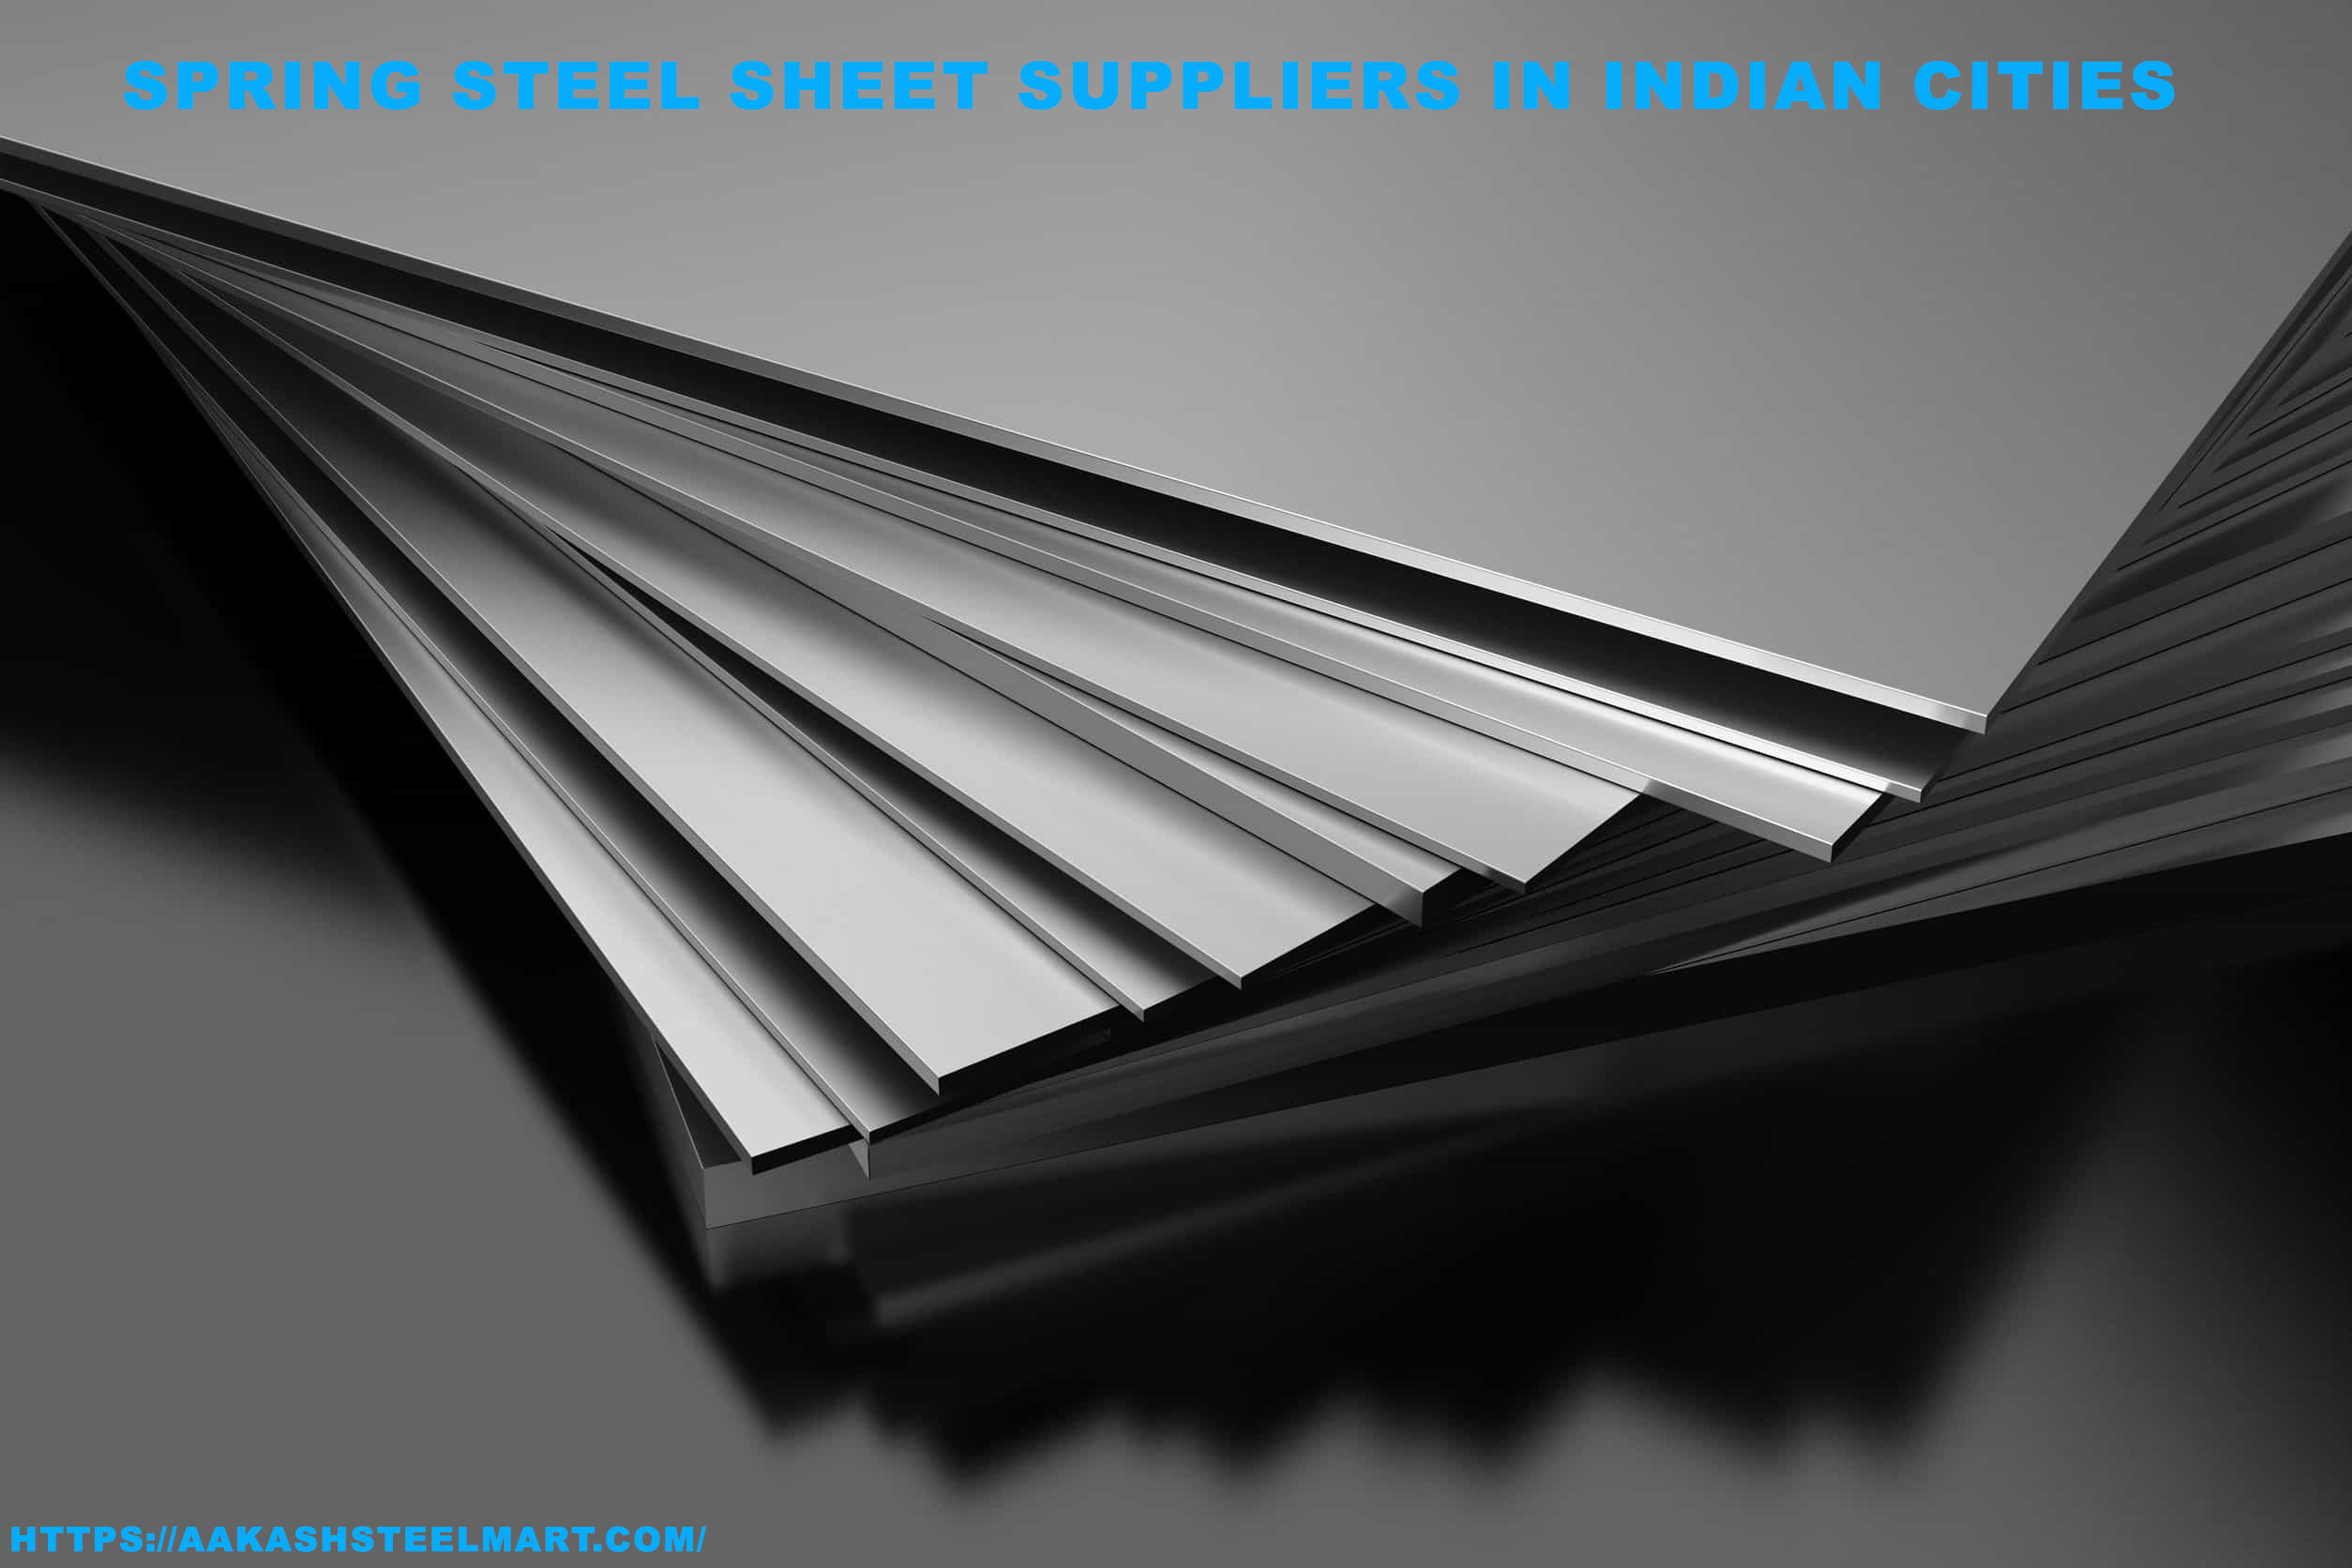 Spring Steel Sheet Suppliers in Indian Cities